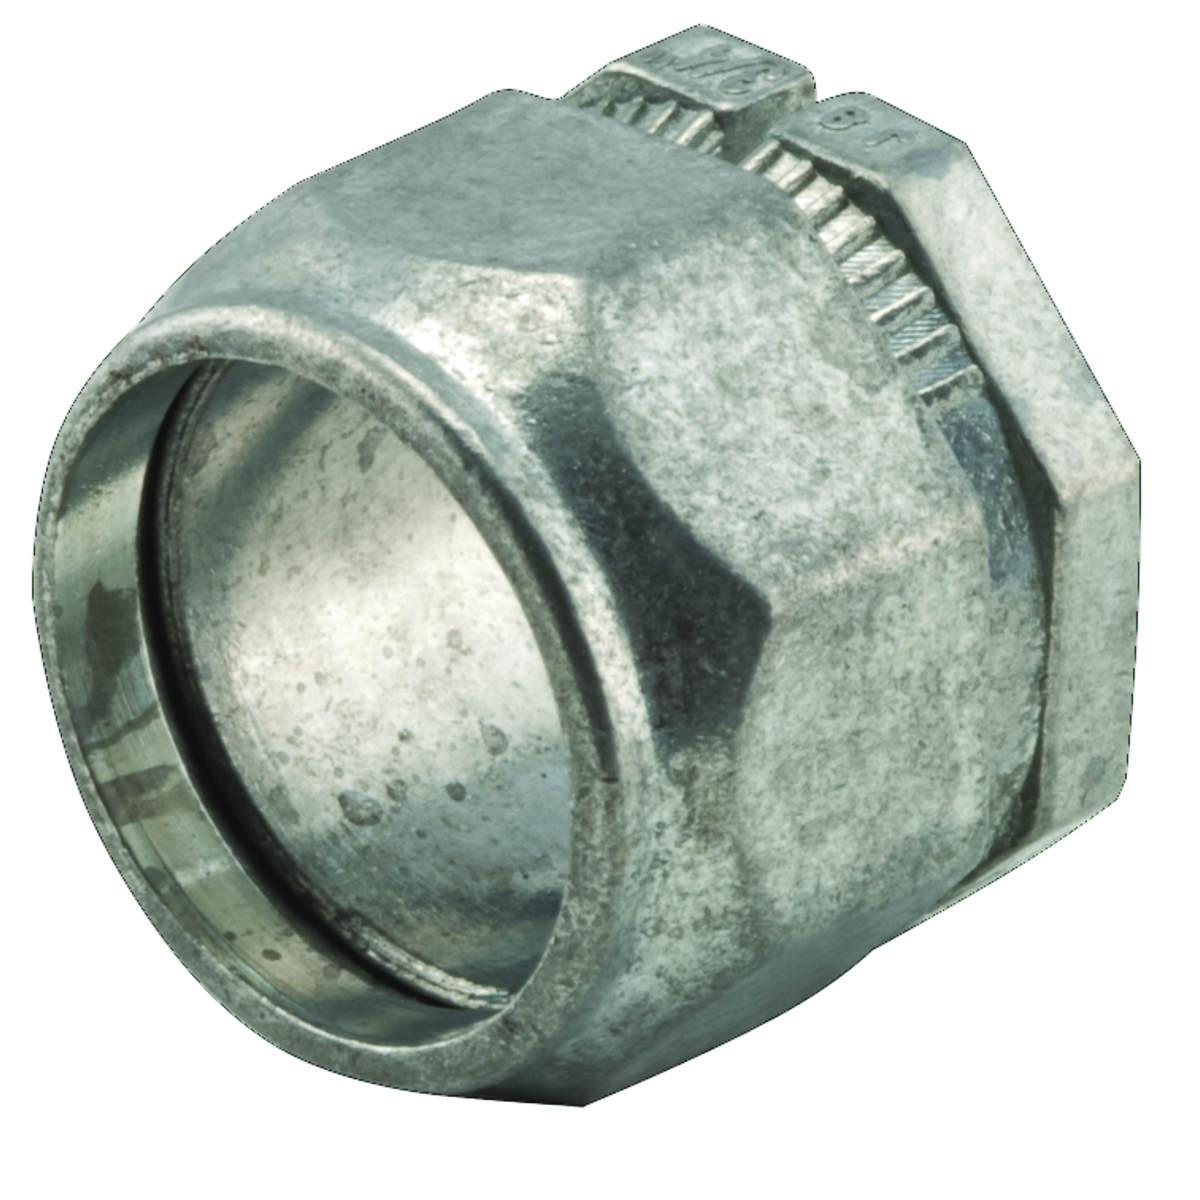 Two-Piece Connector Die Cast Zinc, 1/2 In. Trade Size